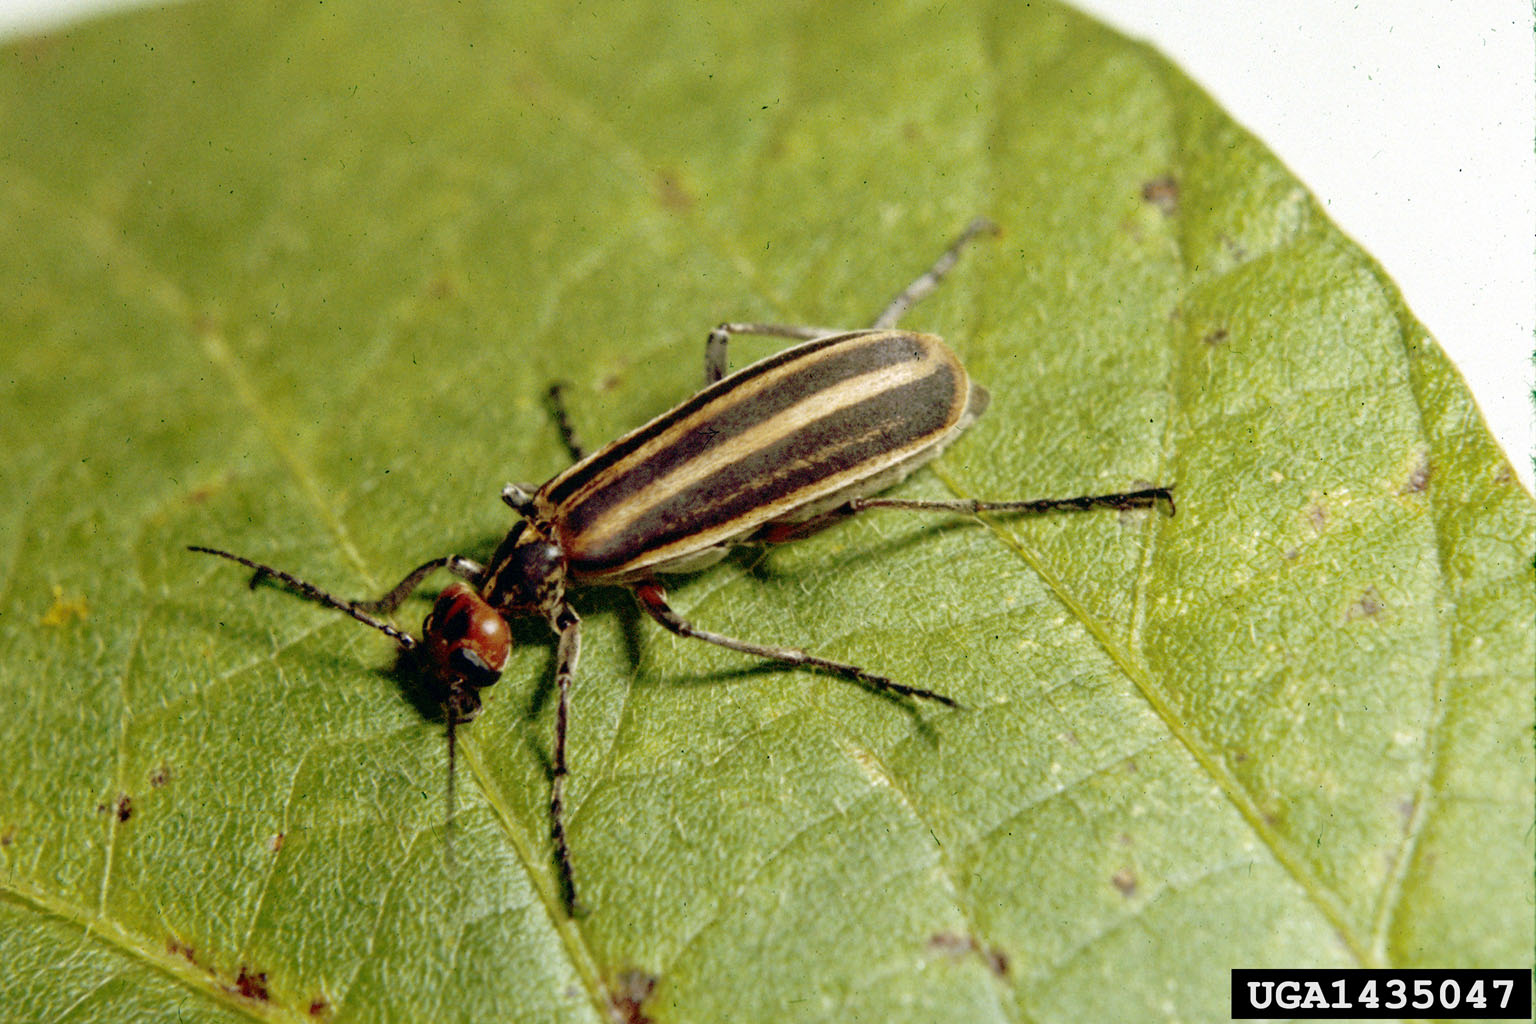 Blister beetles reported in high numbers